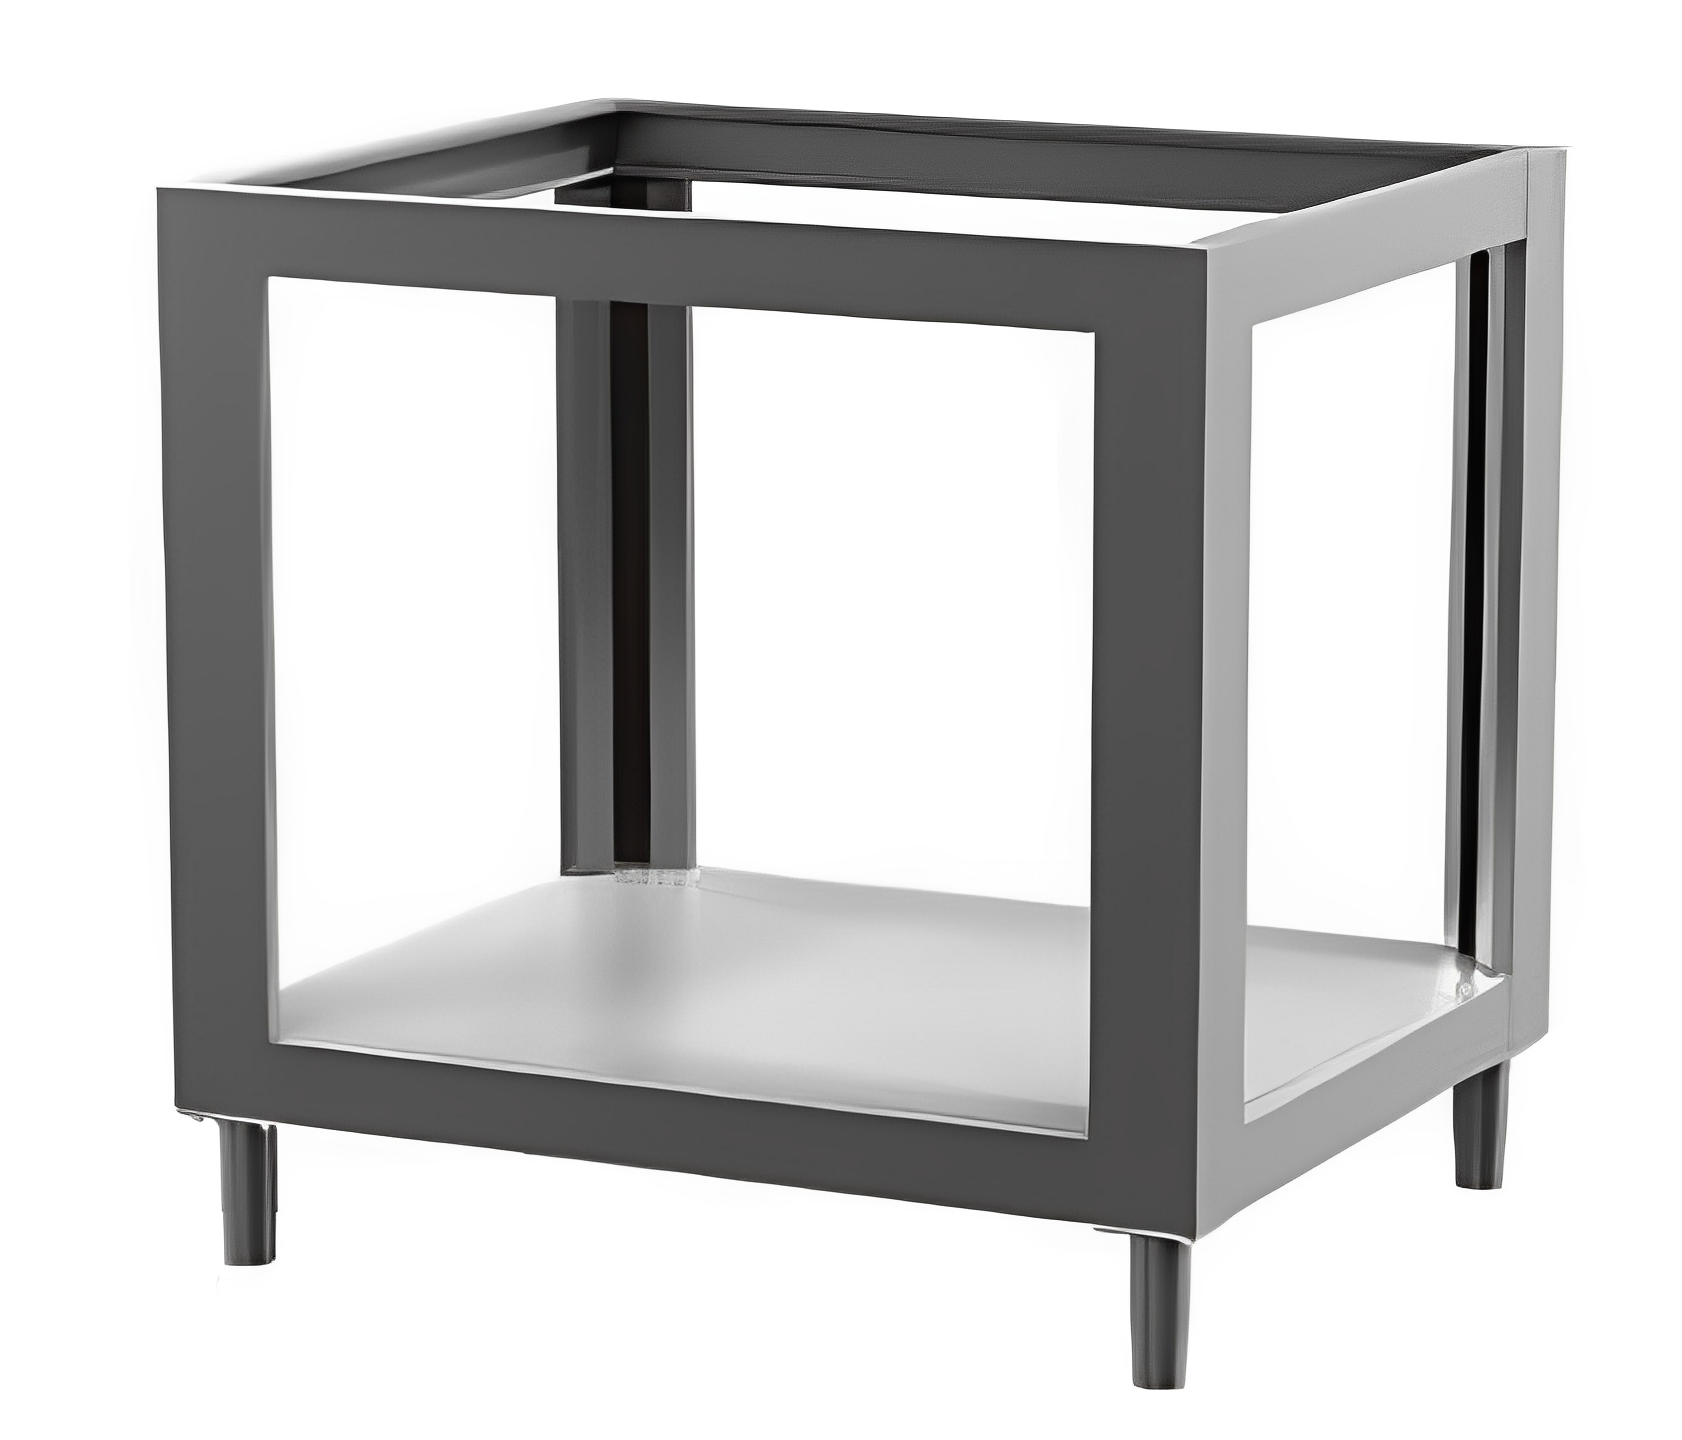 PIZZAGROUP S9+9 Stands in stainless steel, with service shelf.